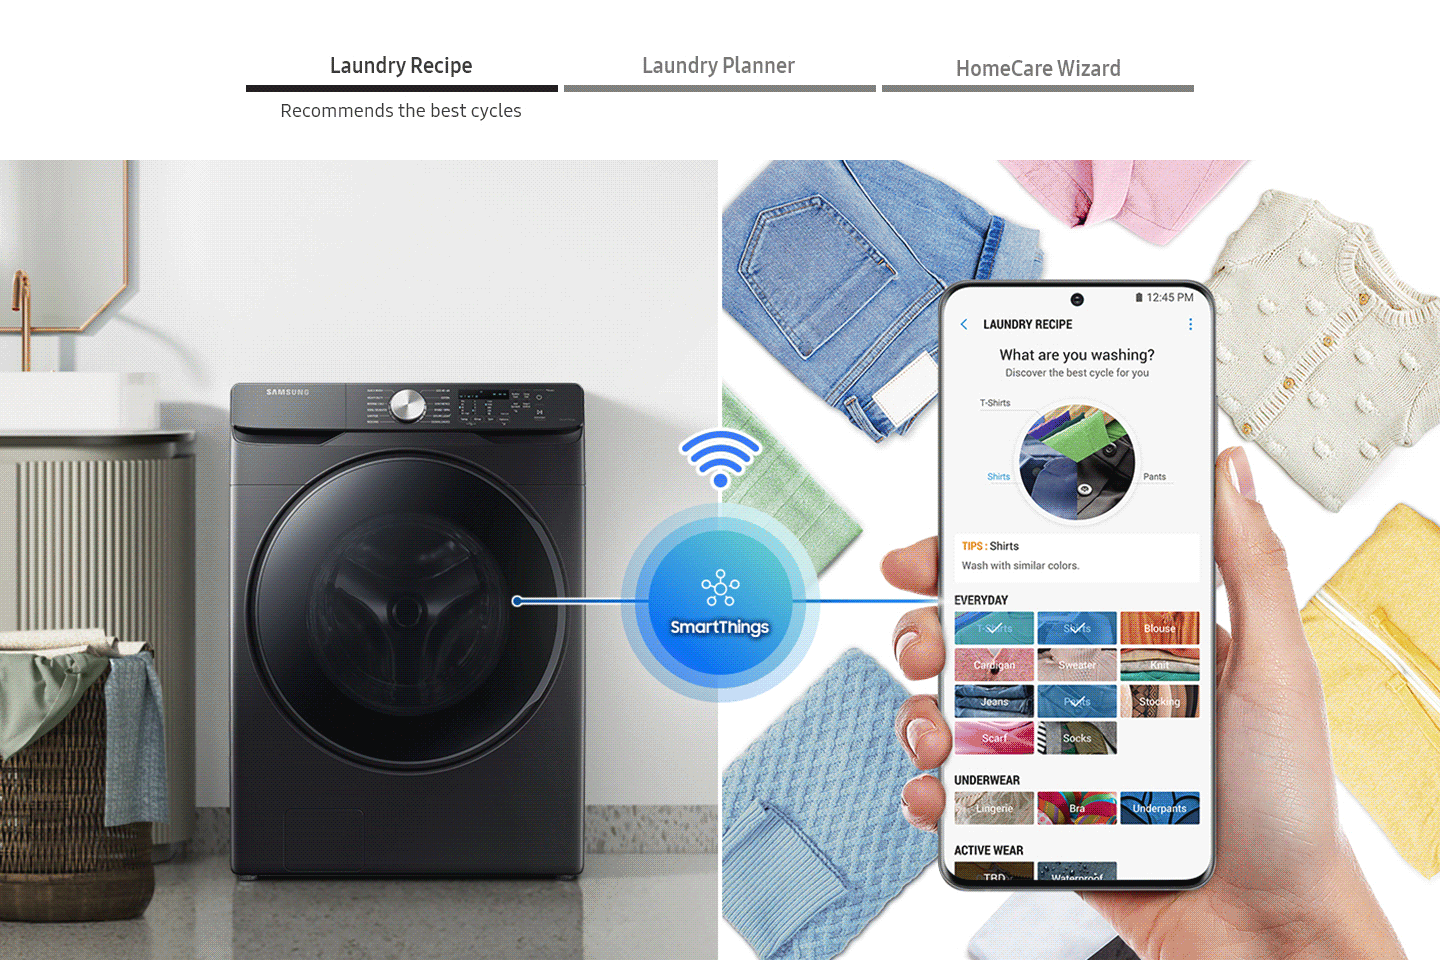 The wash cycle controlled via the SmartThings app. Laundry recipe, Laundry planner, HomeCare Wizard.